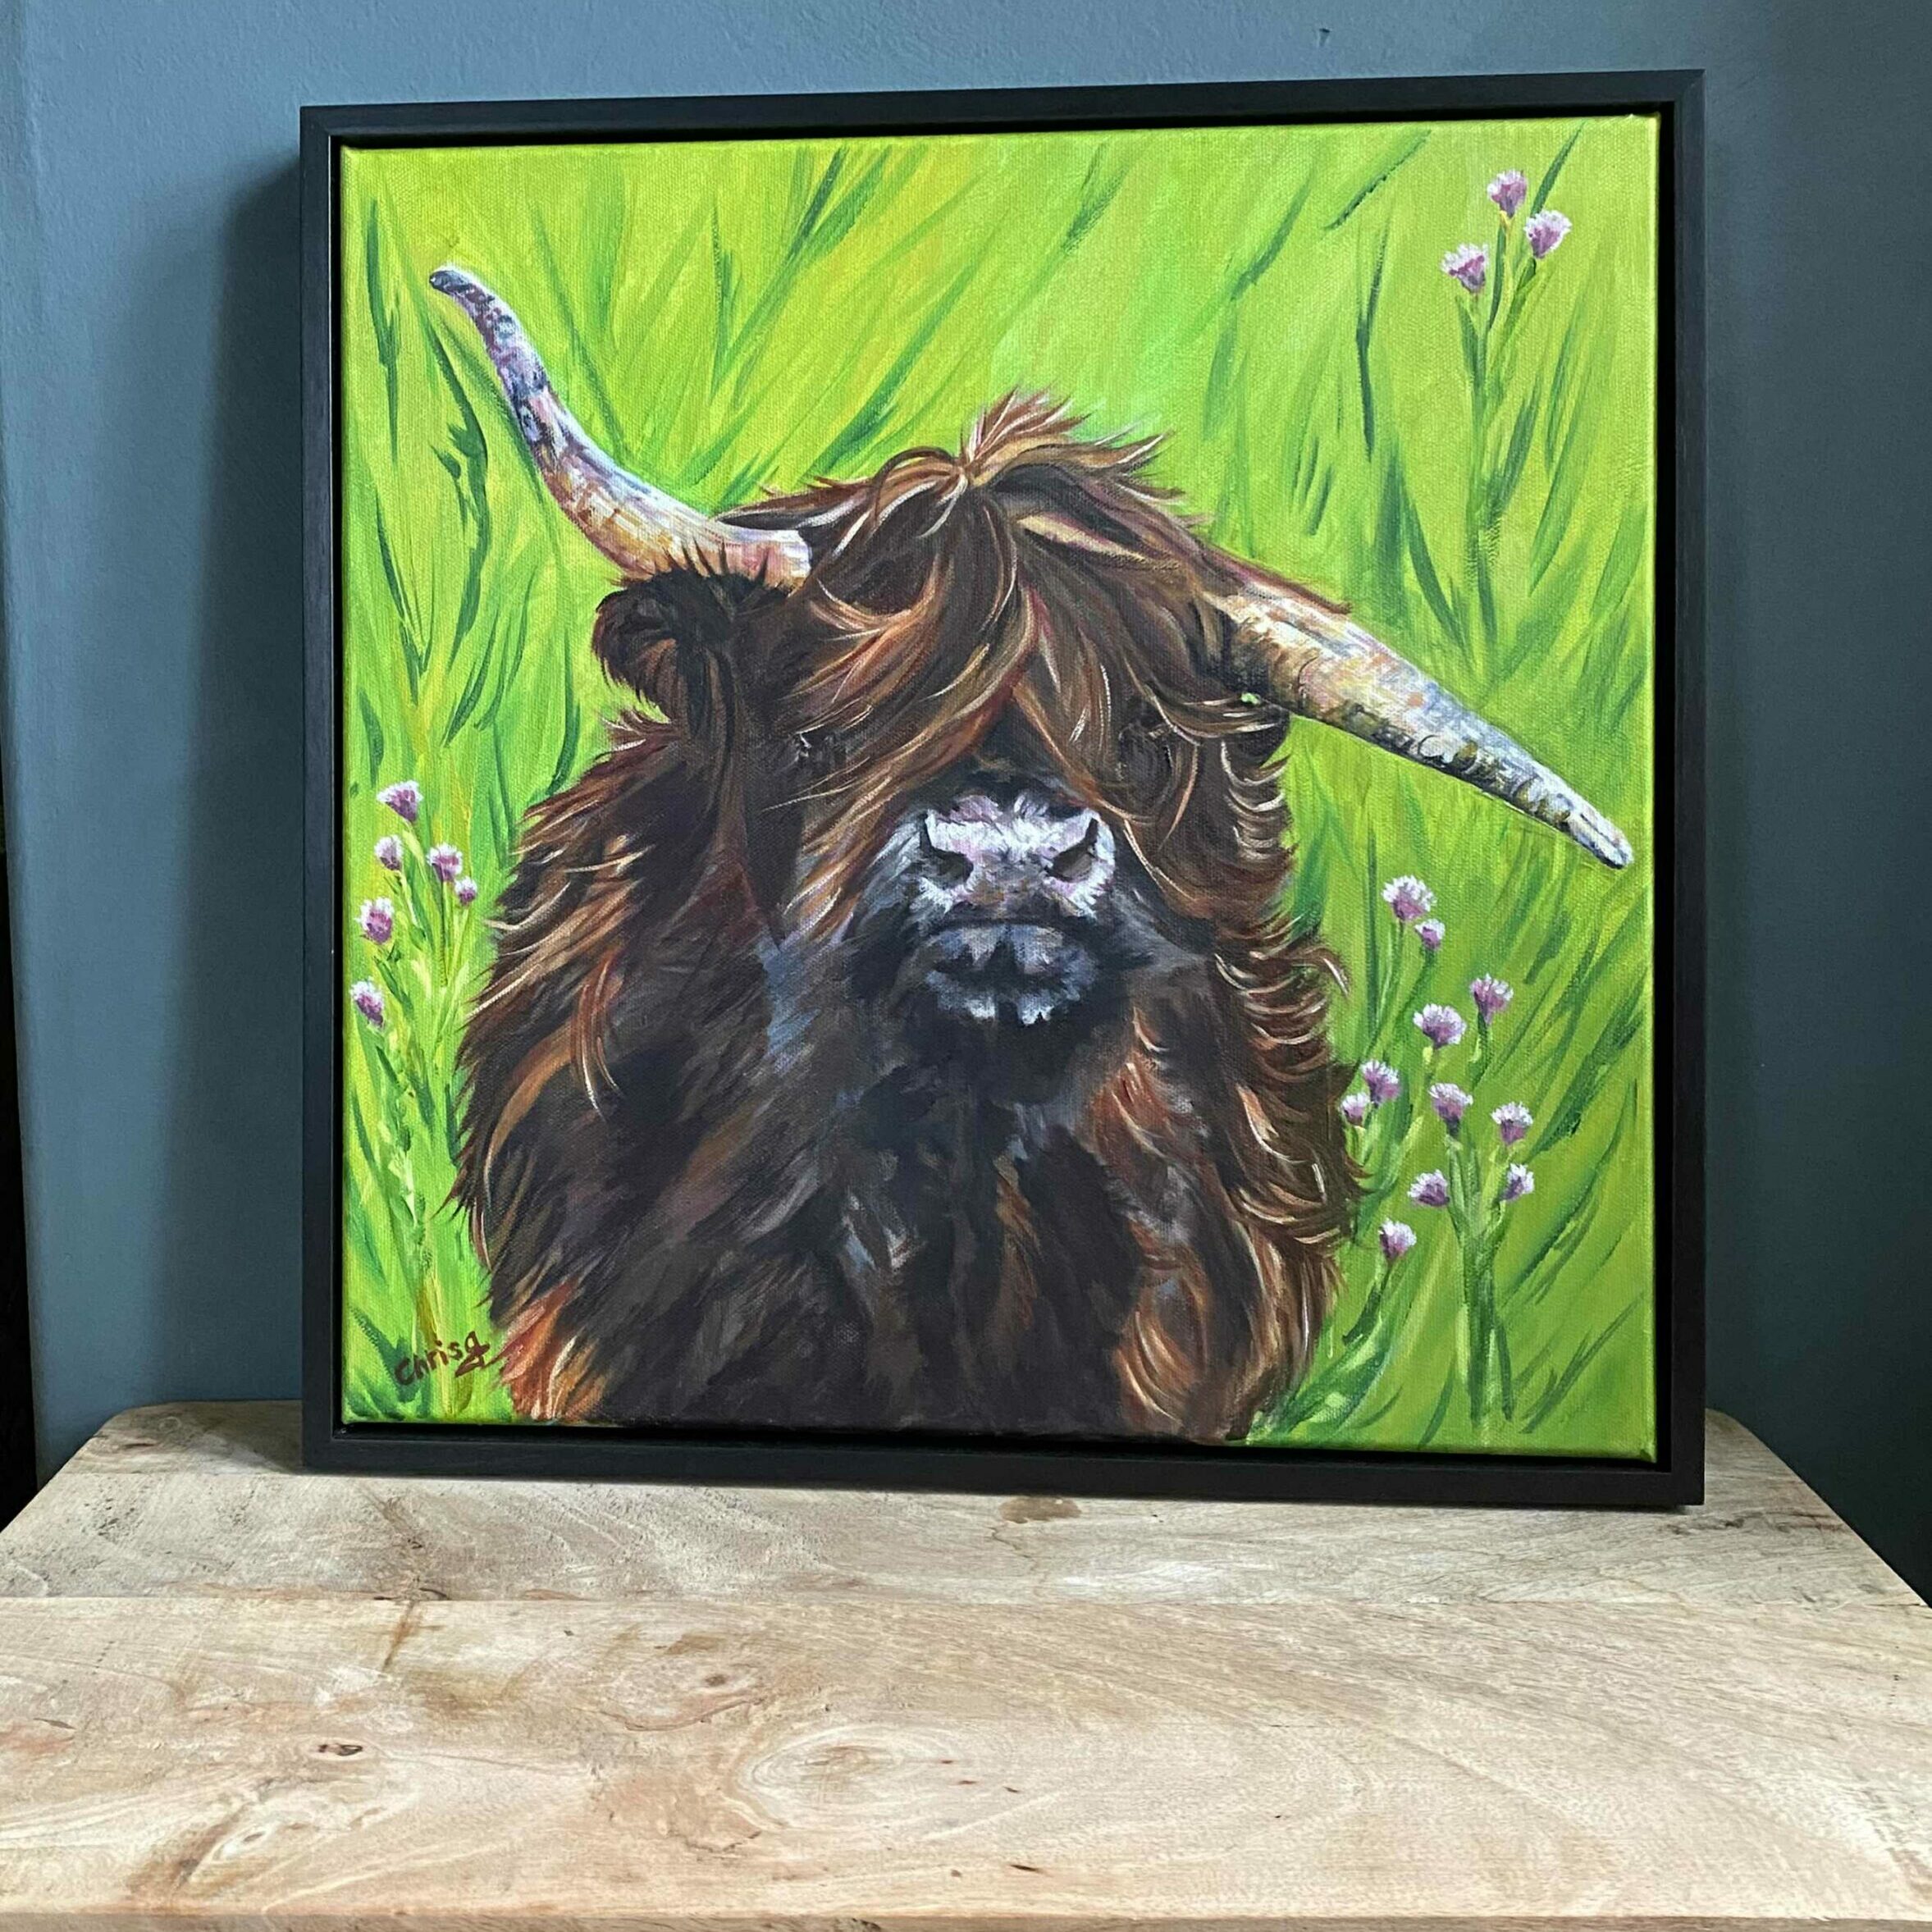 Brown Highland Cow on a Green leafy background. I call her my “wild child”. Not everyone is perfect but wild child’s horns point north and south it’s her imperfection but she’s beautiful and deserves a portrait.